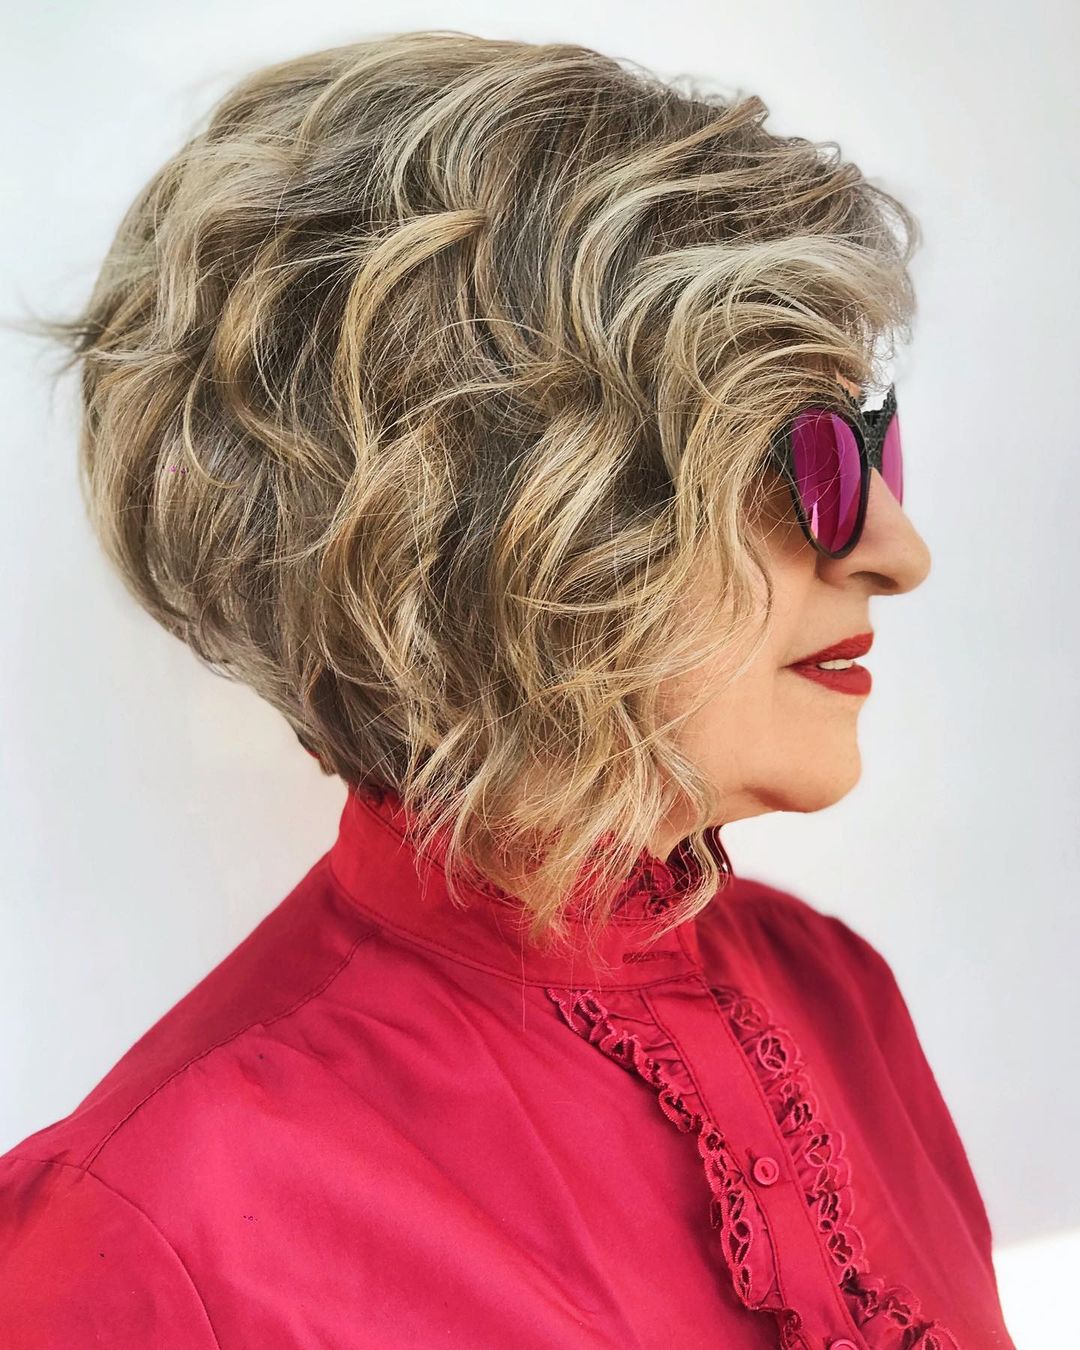 Short Stacked Bob with Curly Styling and Glasses